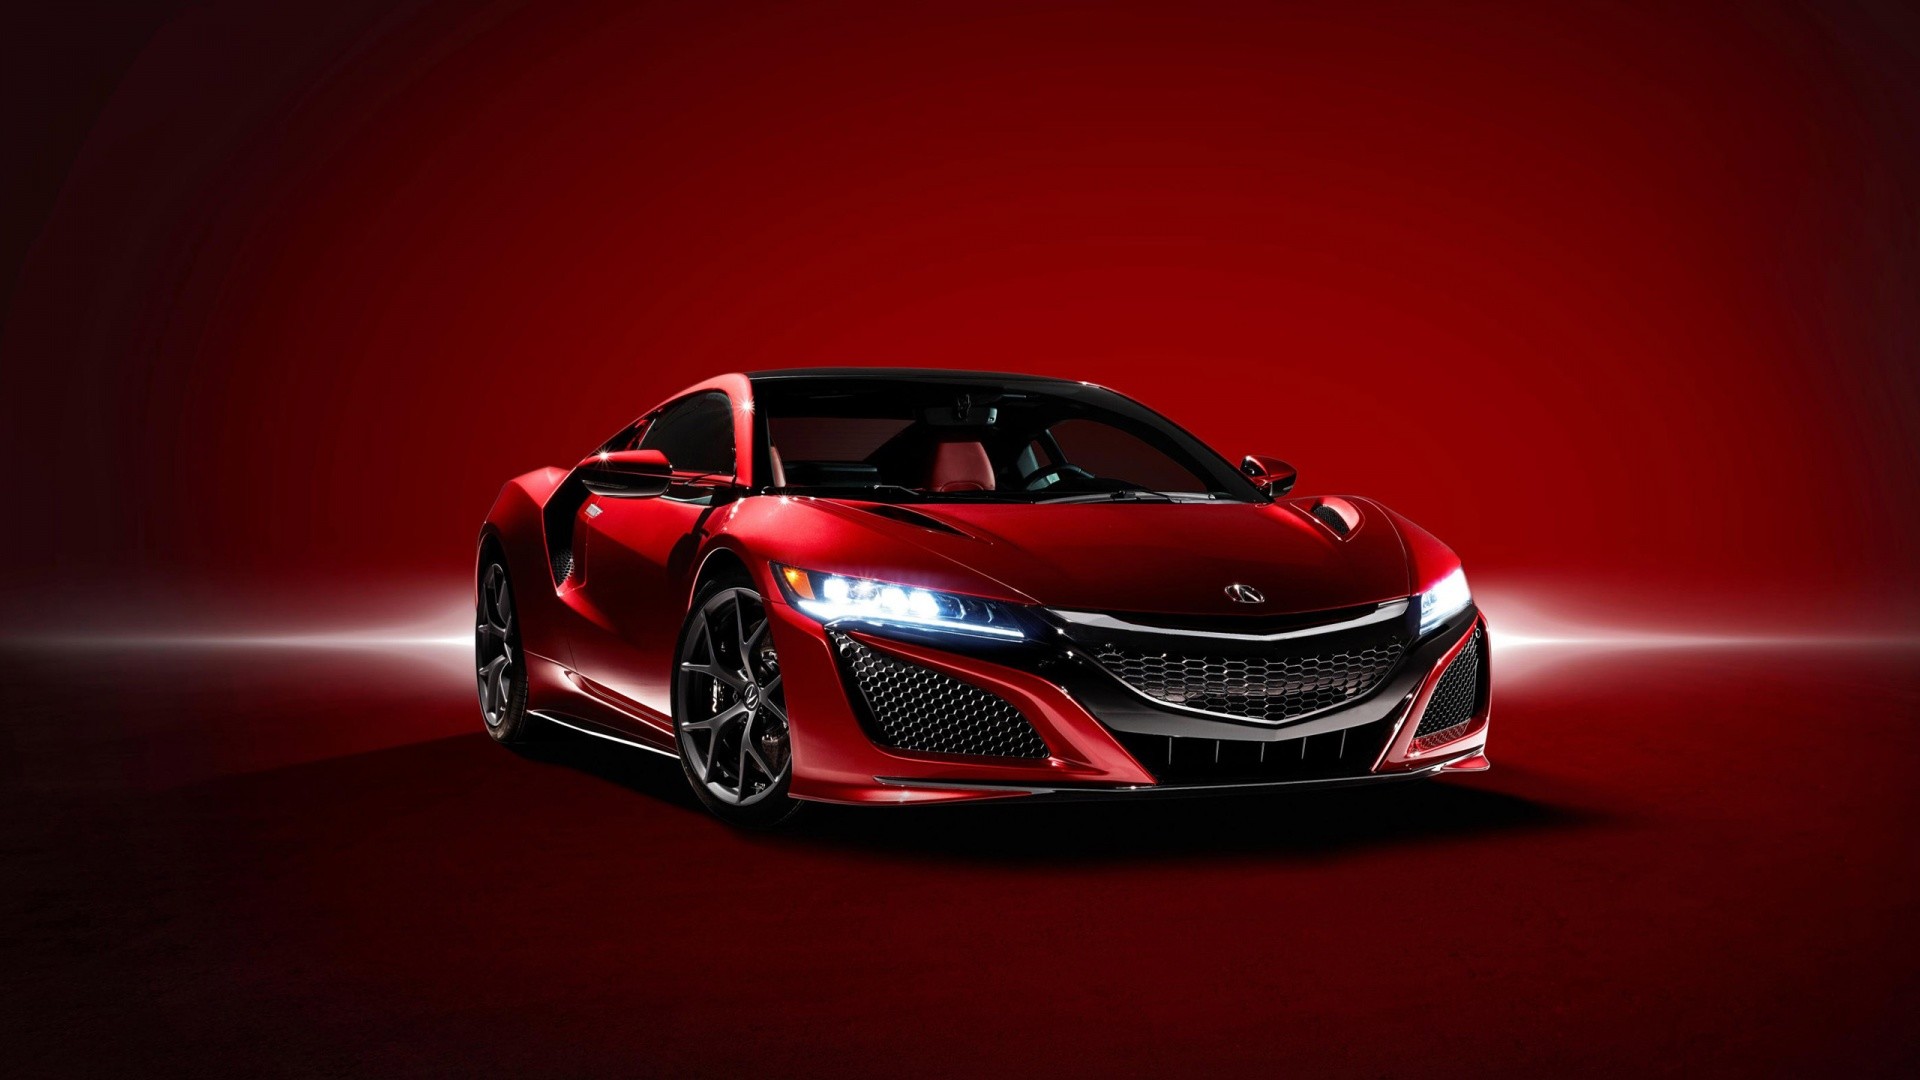 1920x1080 2016 Acura NSX Supercar Wallpapers